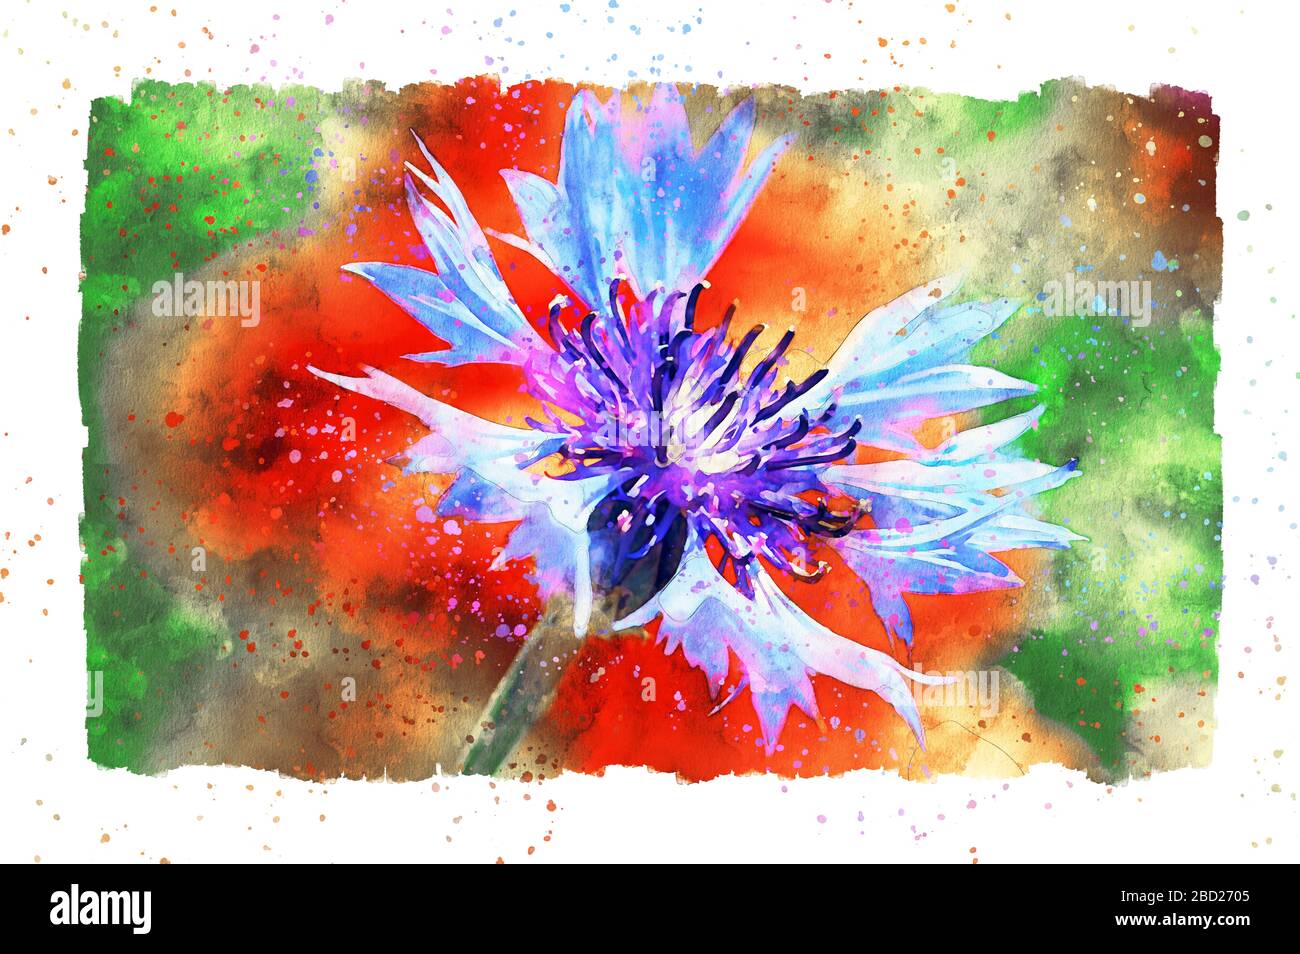 Watercolor painting of poppy flower and corn flower blossom in summer time. frame with dots. Stock Photo